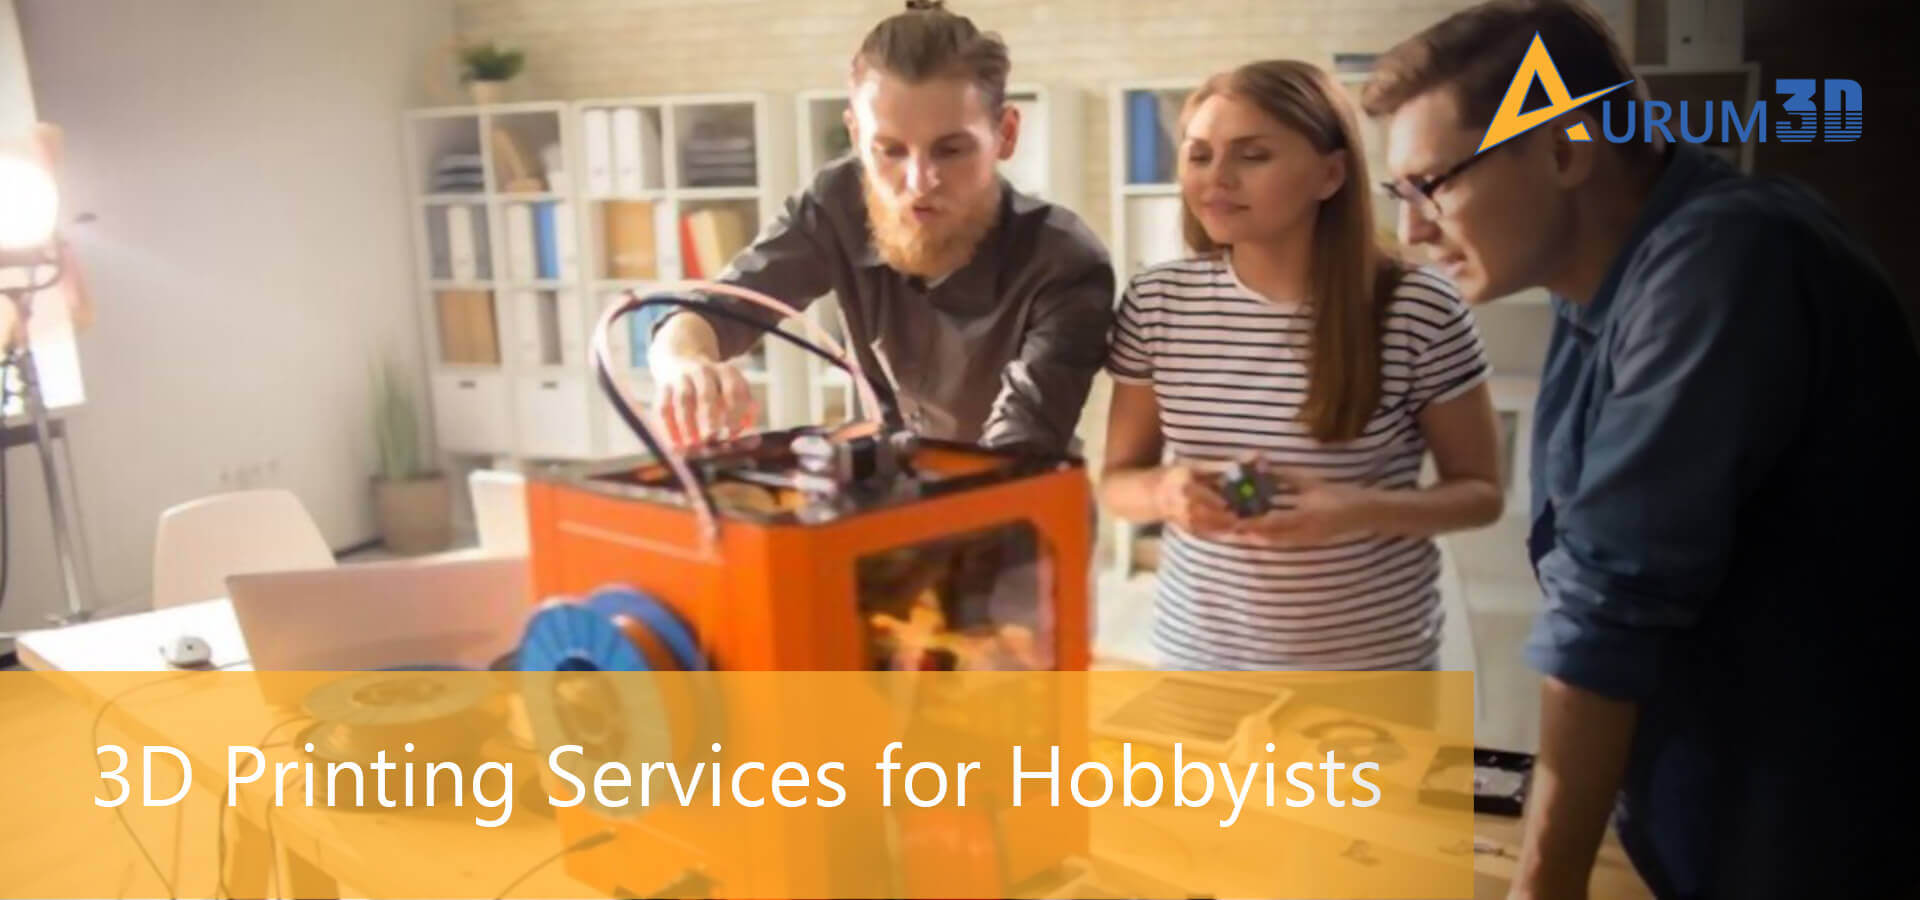 3D Printing Services for Hobbyists